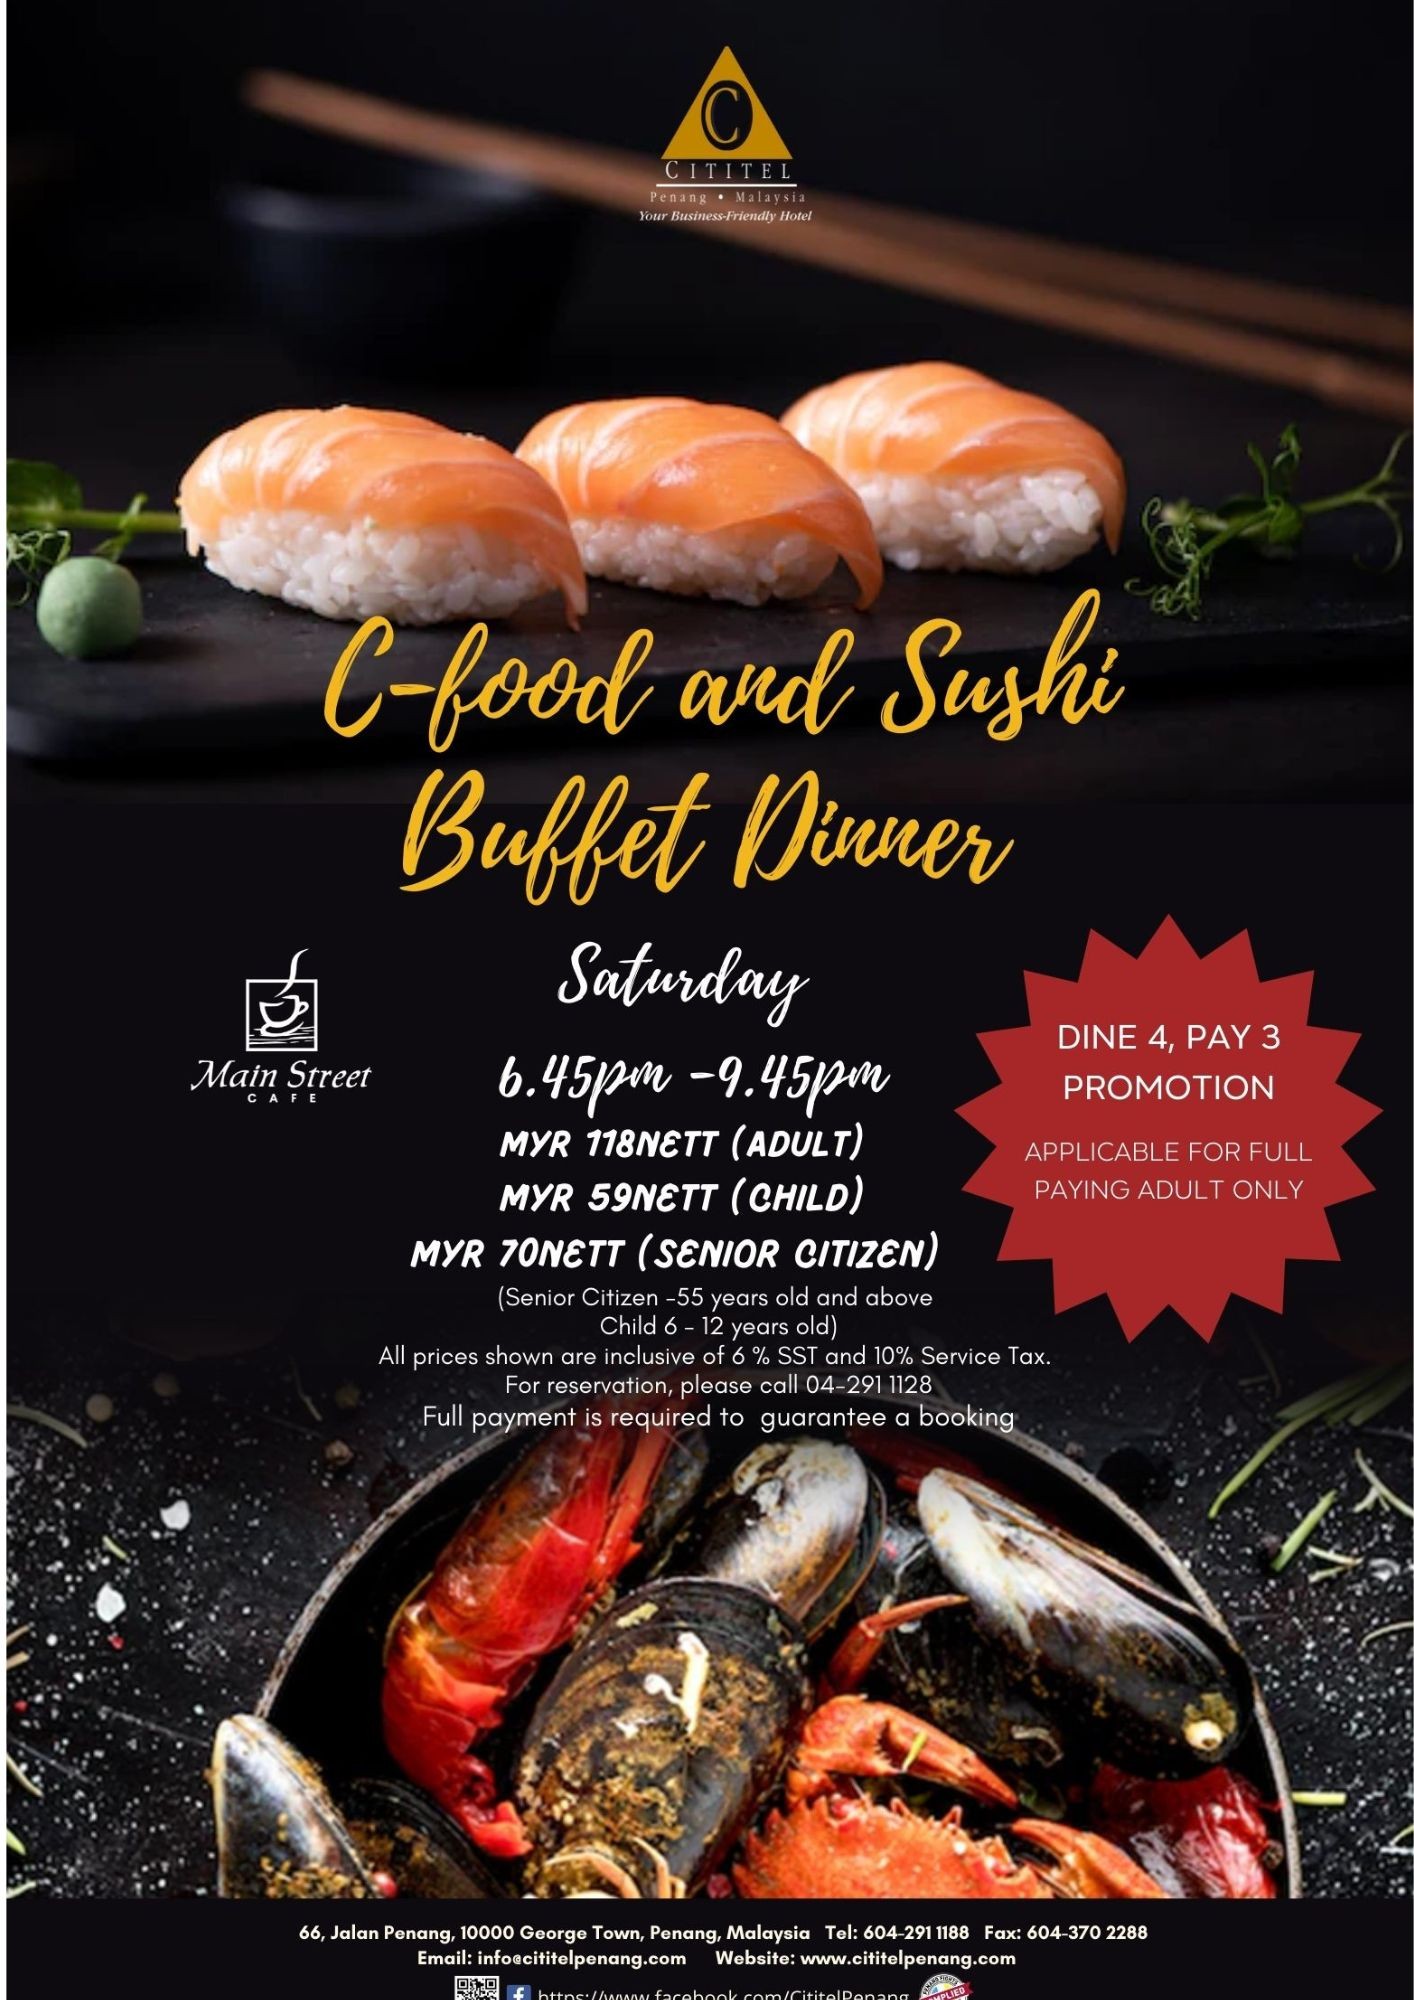 C-food and Sushi buffet by Cititel Penang